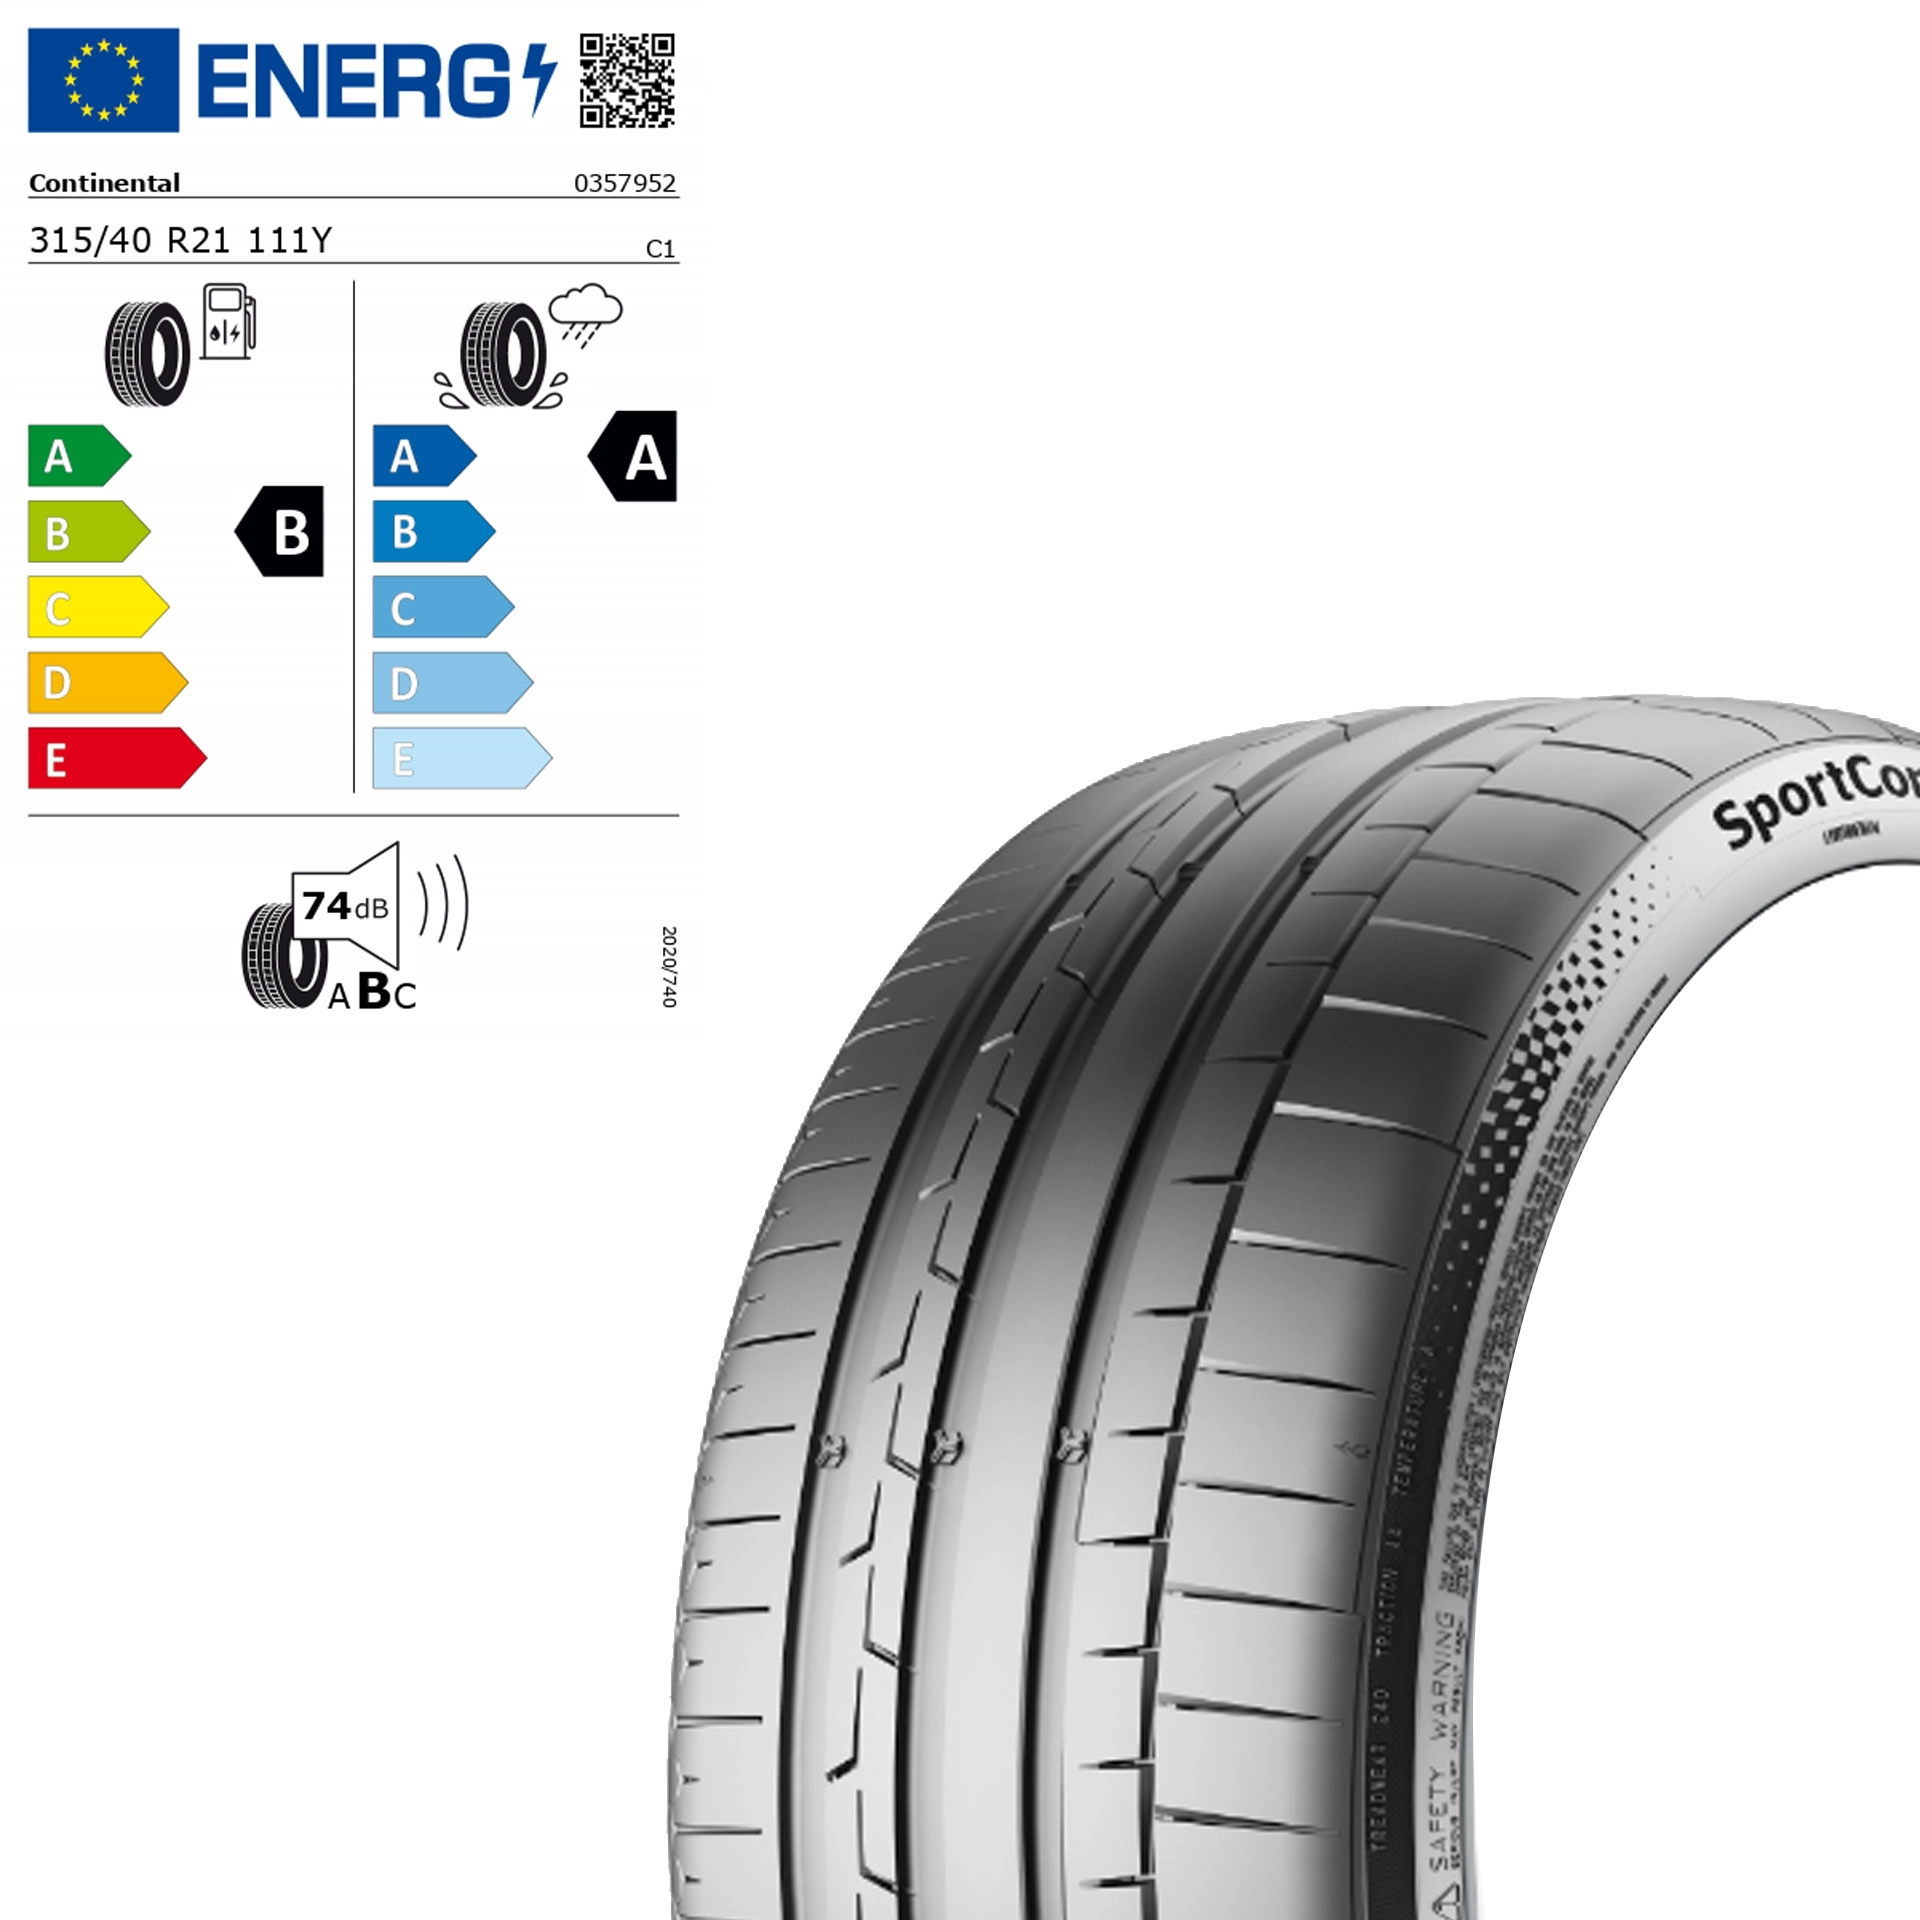 315/40 R21 111Y Continental SportContact 6 MO Sommerreifen Q44002111086A